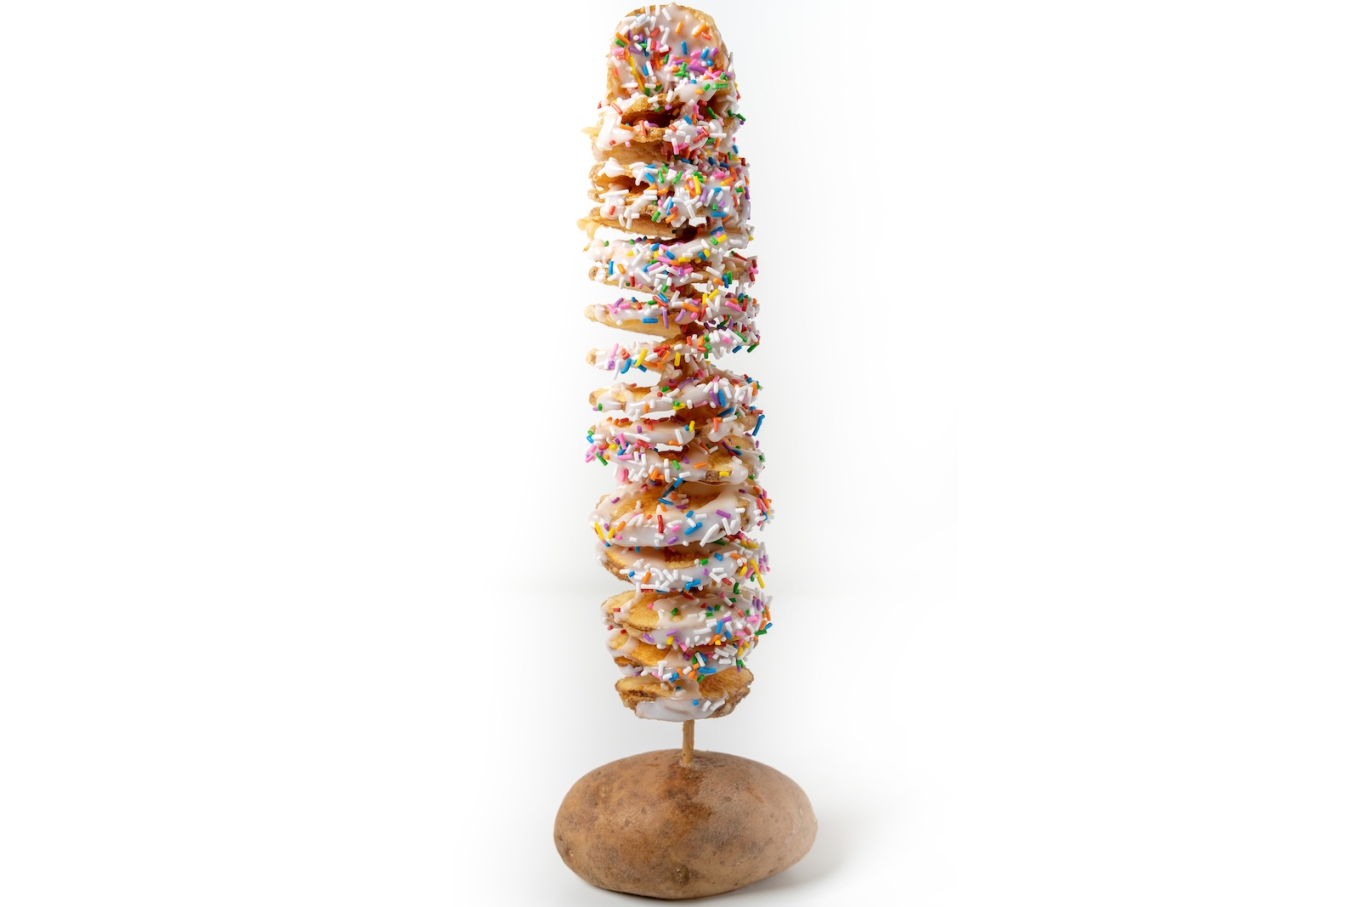 Rotato Twisted Potato with icing and sprinkles